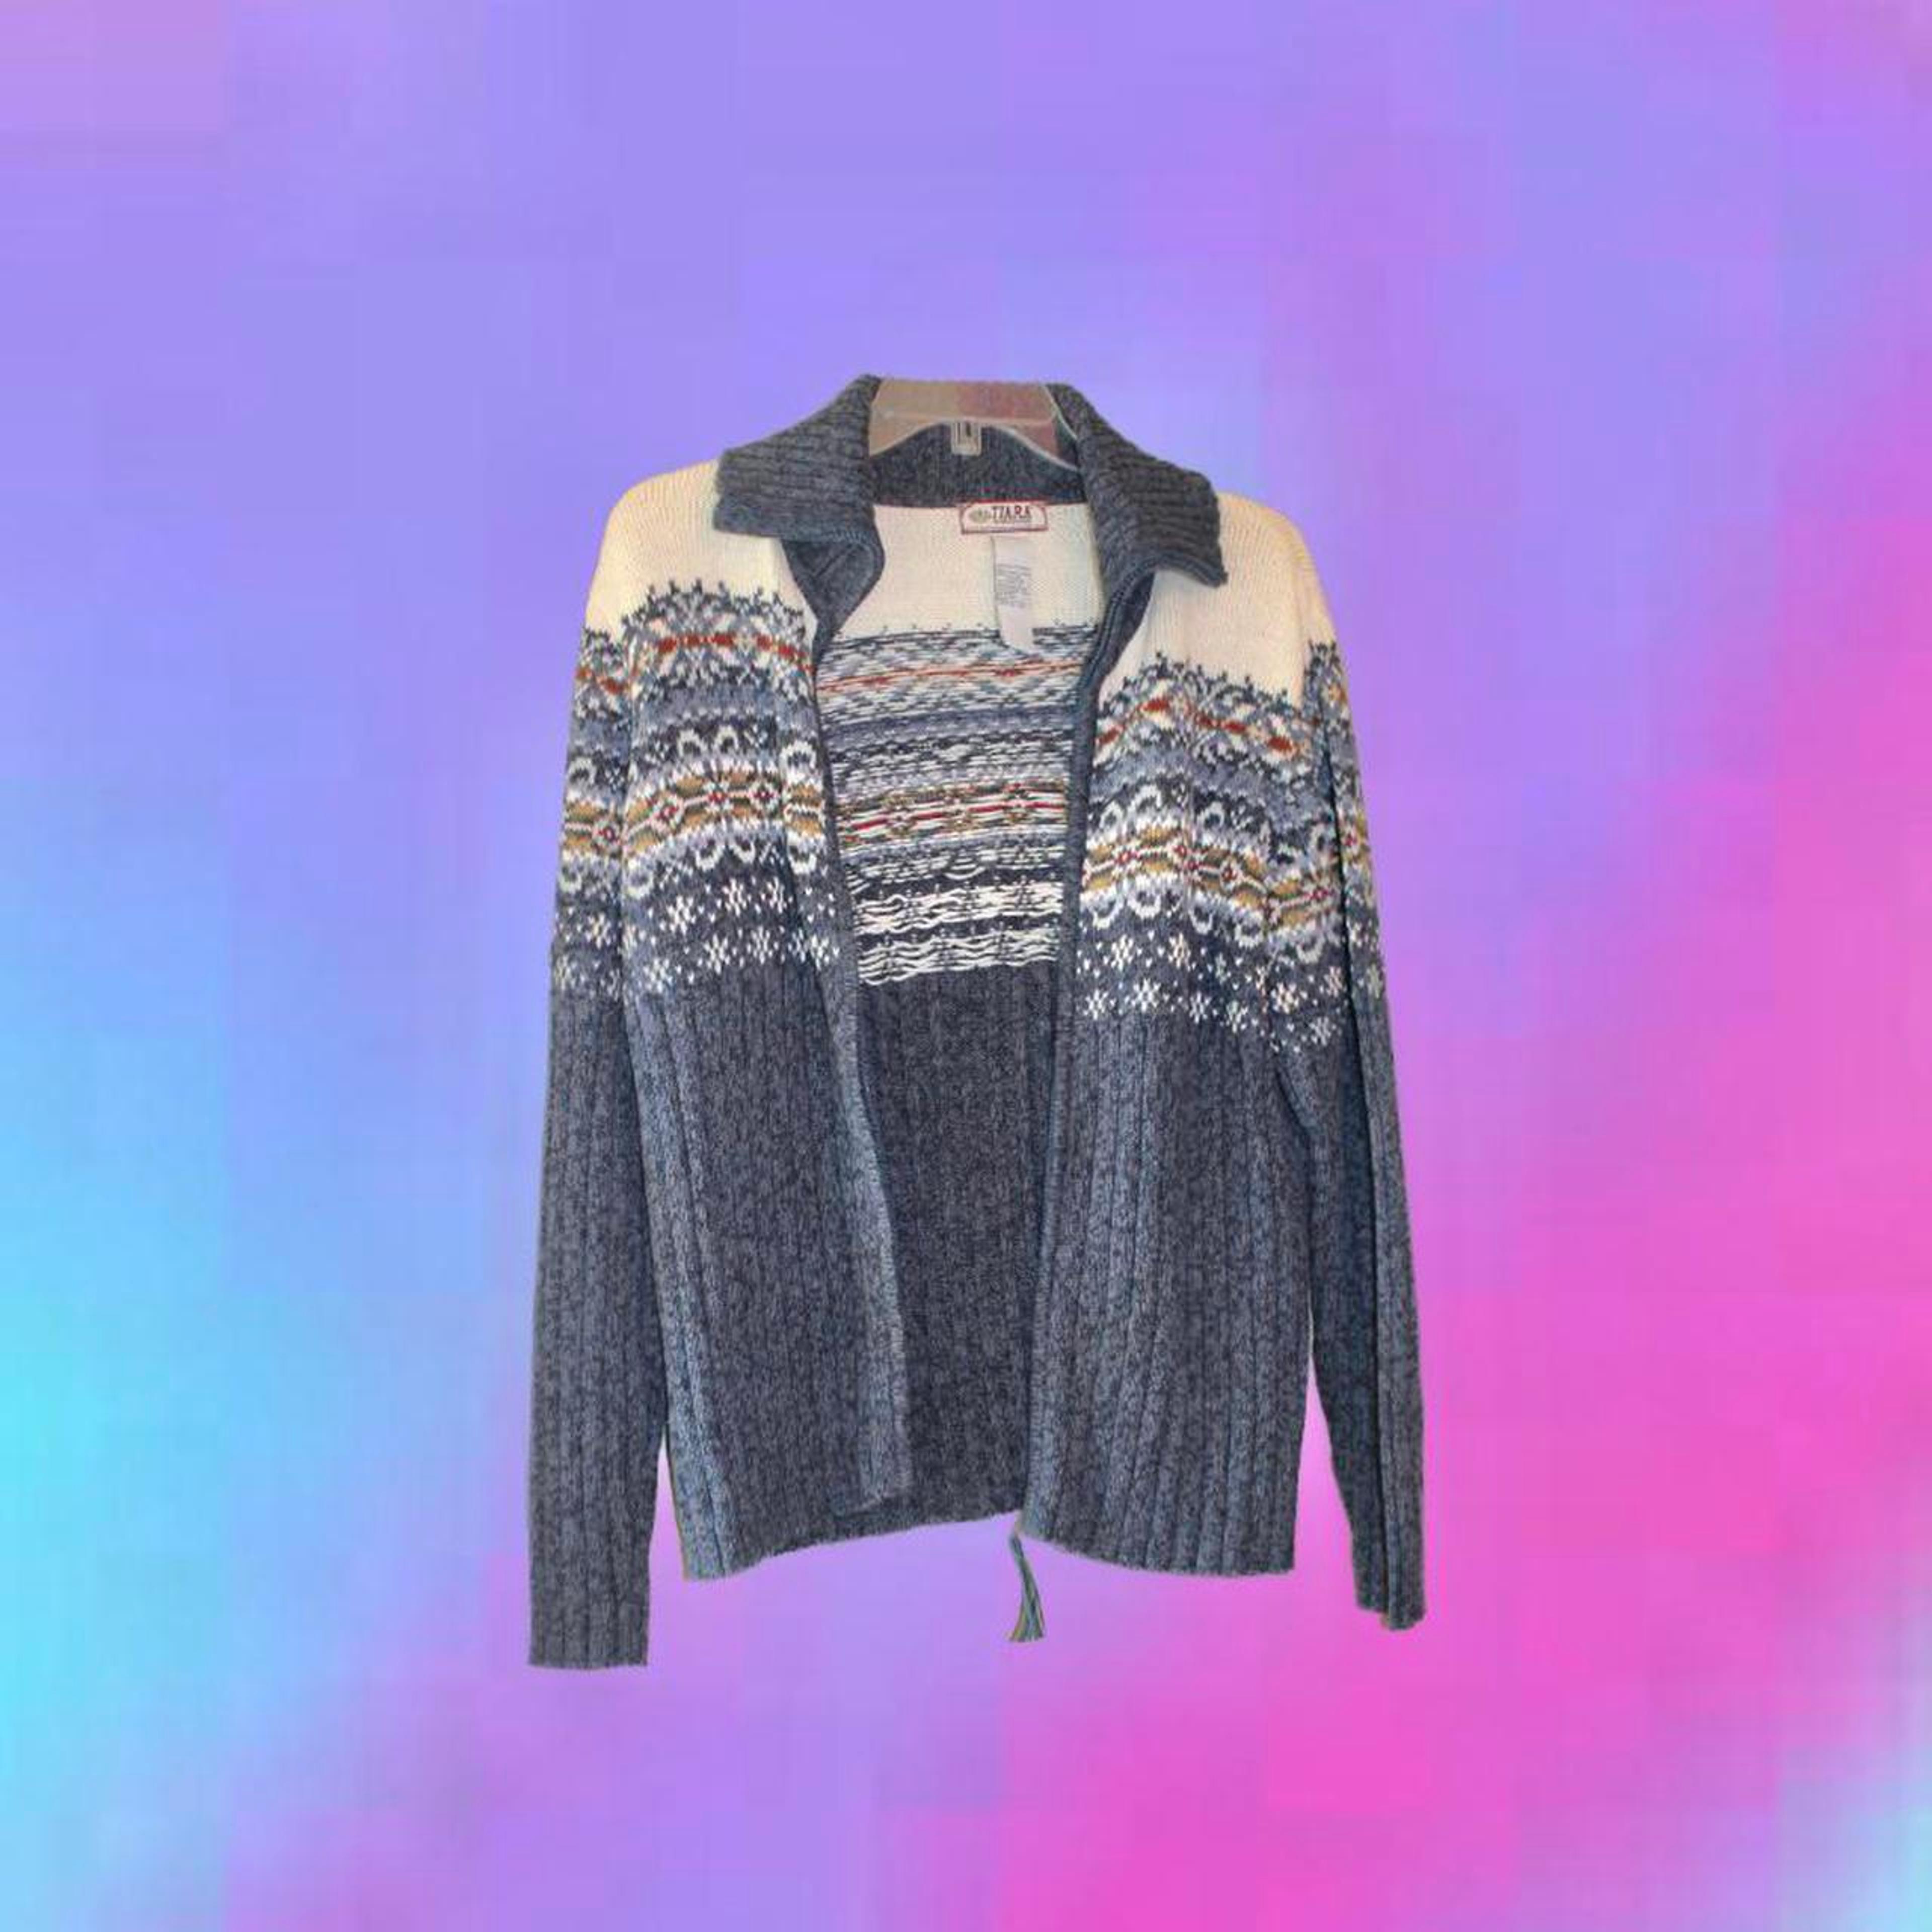 Blue and Cream Vintage Winter Sweater! Has a full...